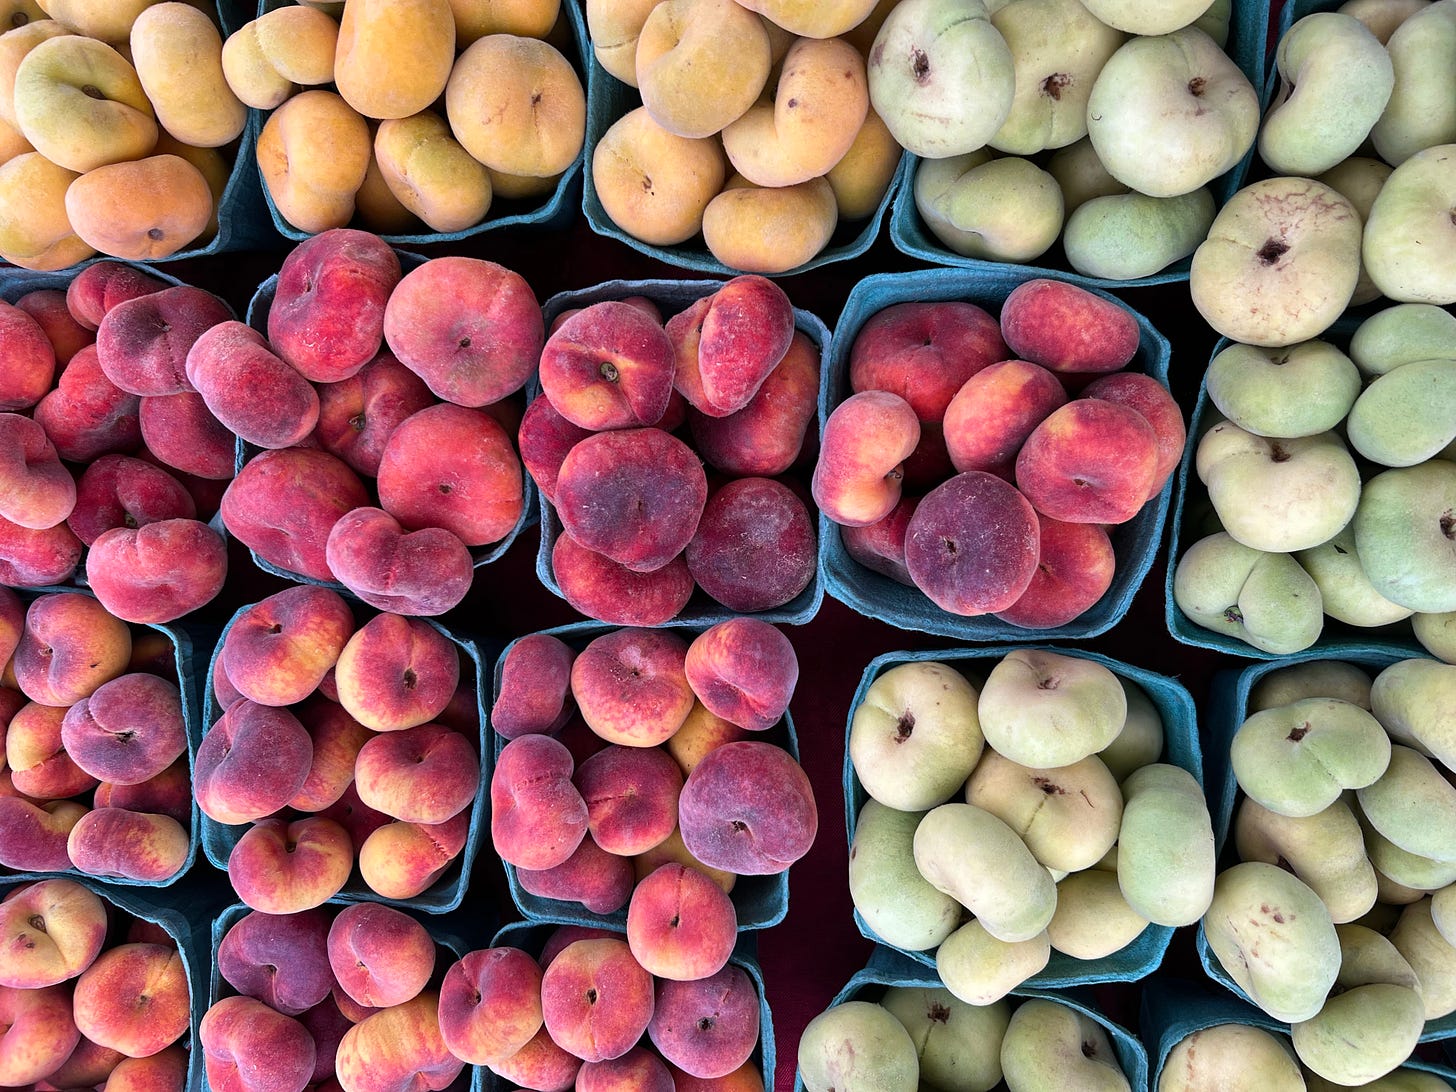 Flat peaches in yellow, orange, and light green